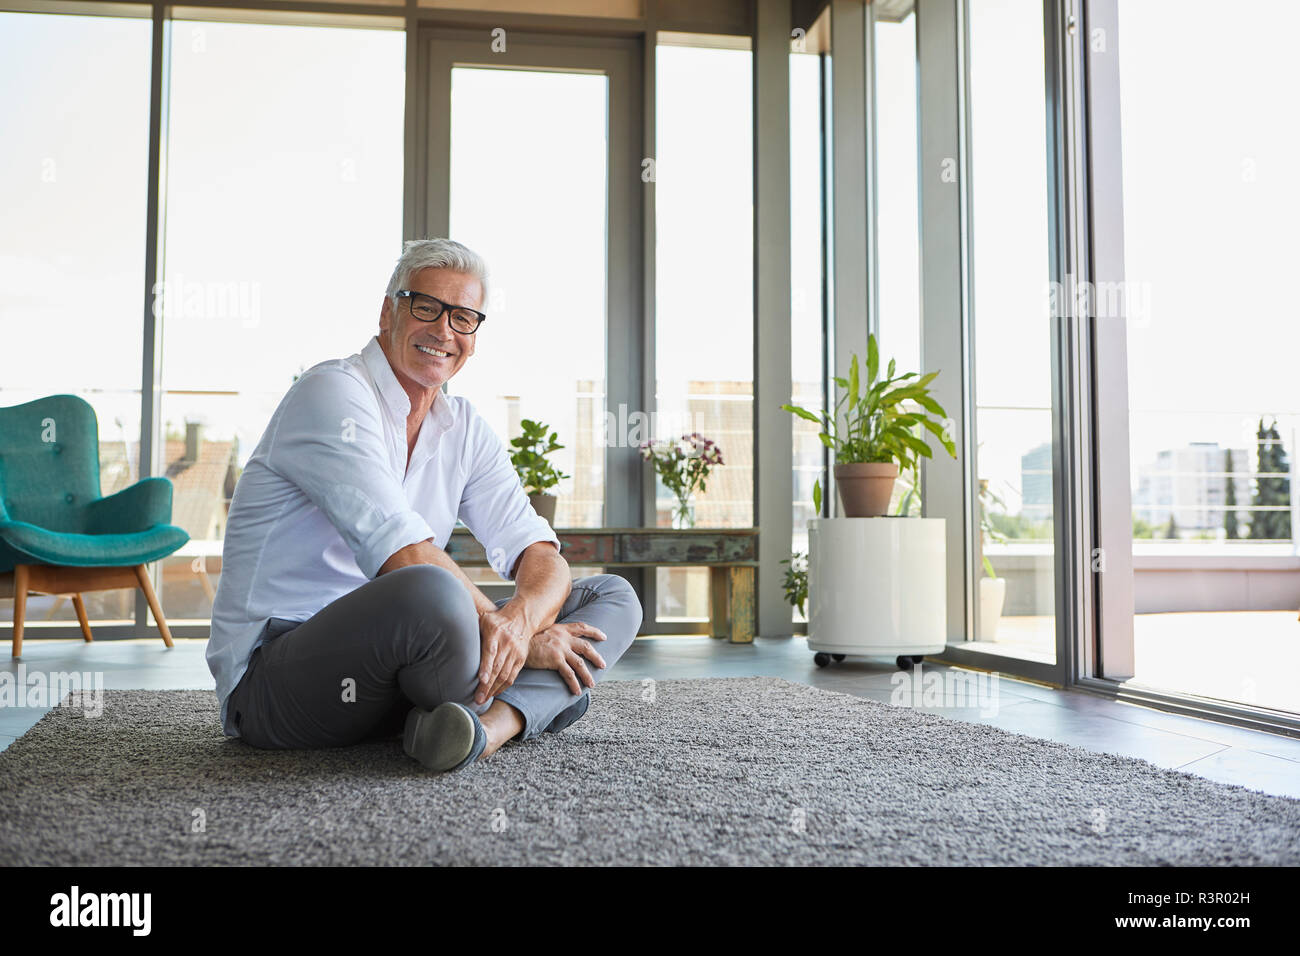 Smiling mature man relaxing sitting on carpet at home Stock Photo